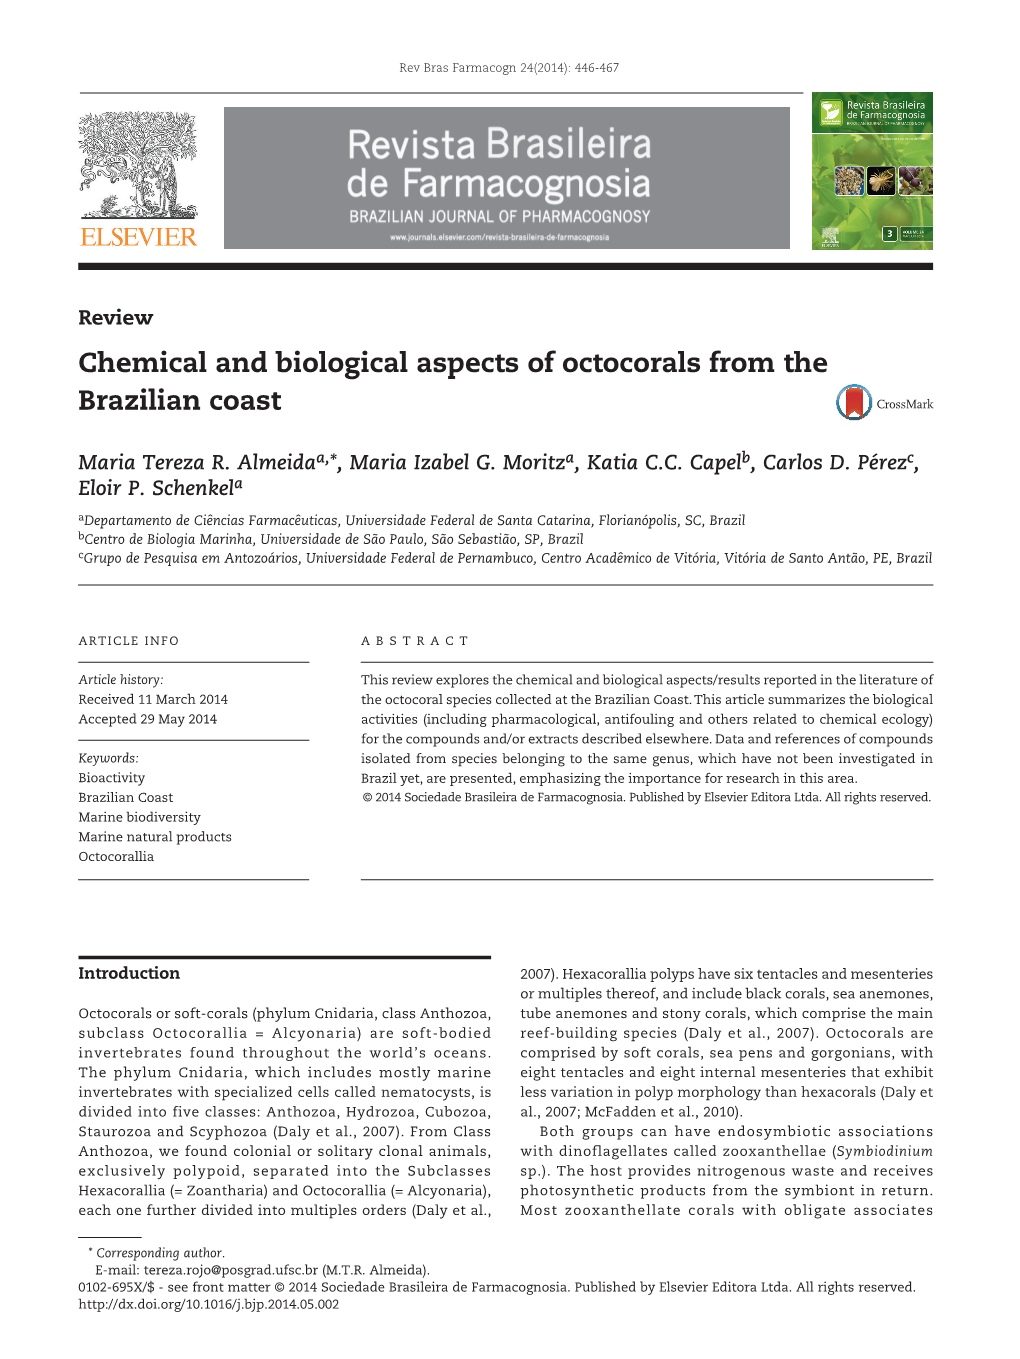 Chemical and Biological Aspects of Octocorals from the Brazilian Coast